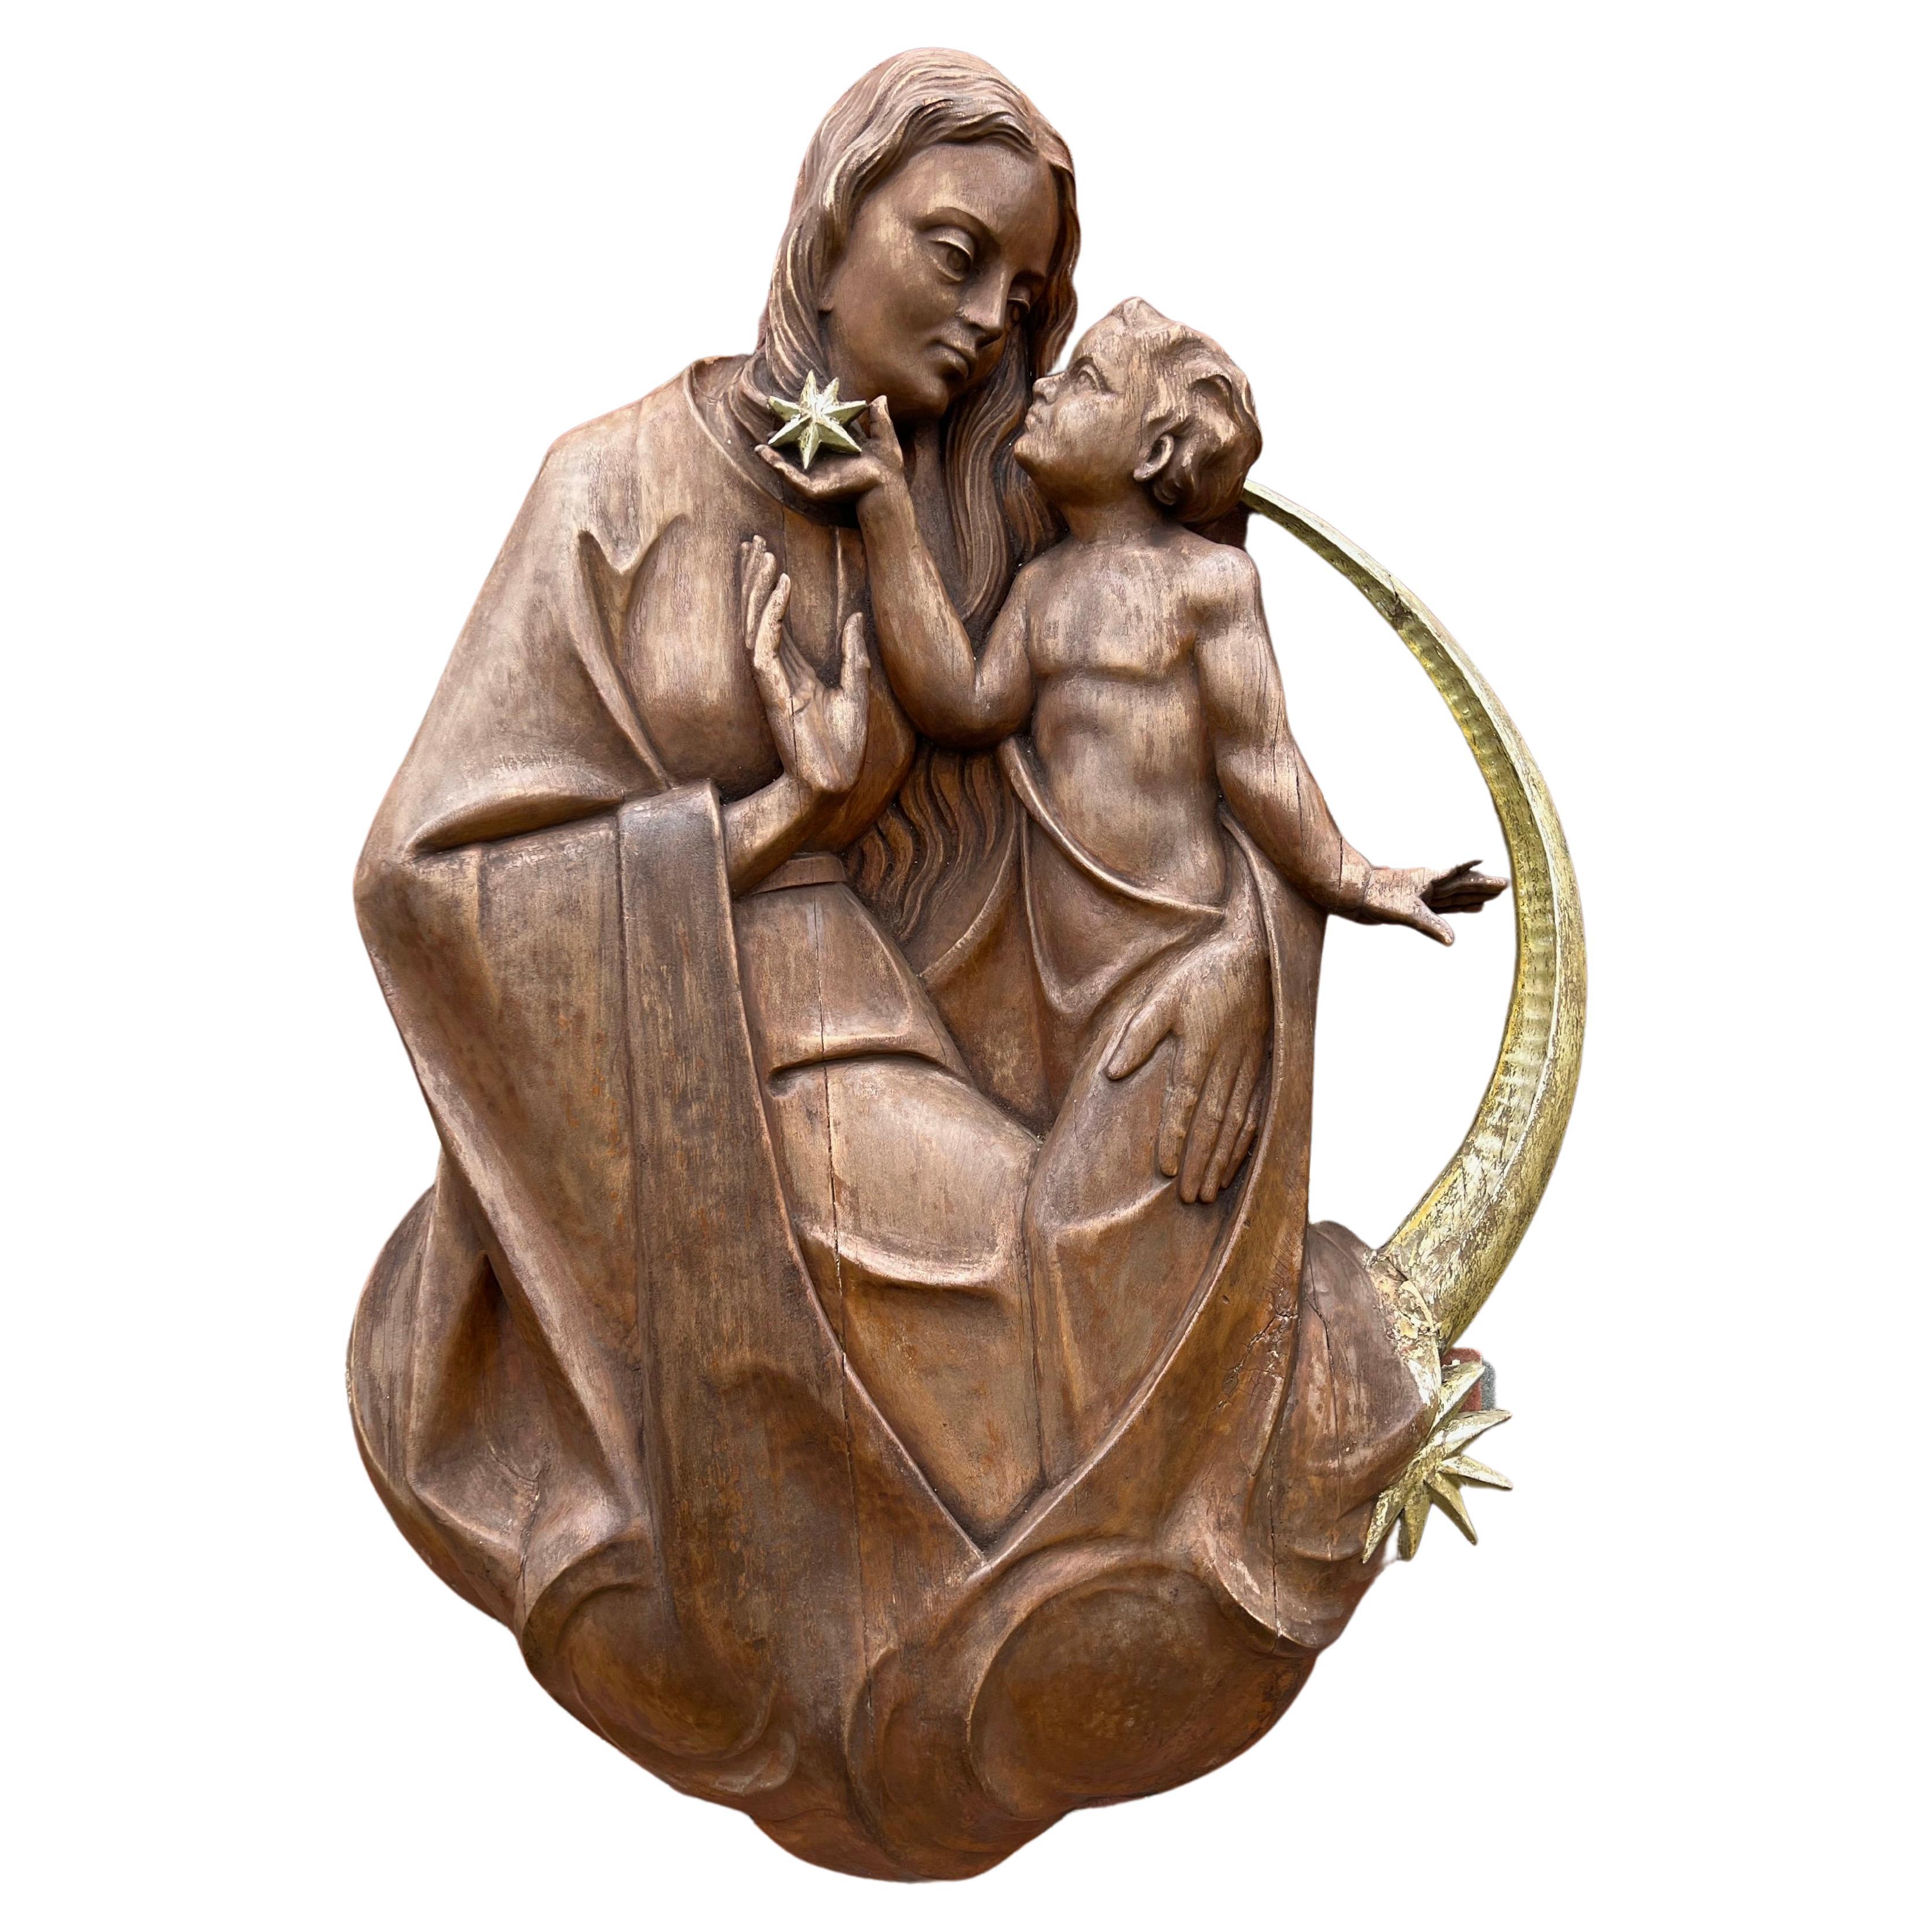 Large Oak Wall Plaque of Virgin Mary & Child Jesus Sitting on a Crescent Moon